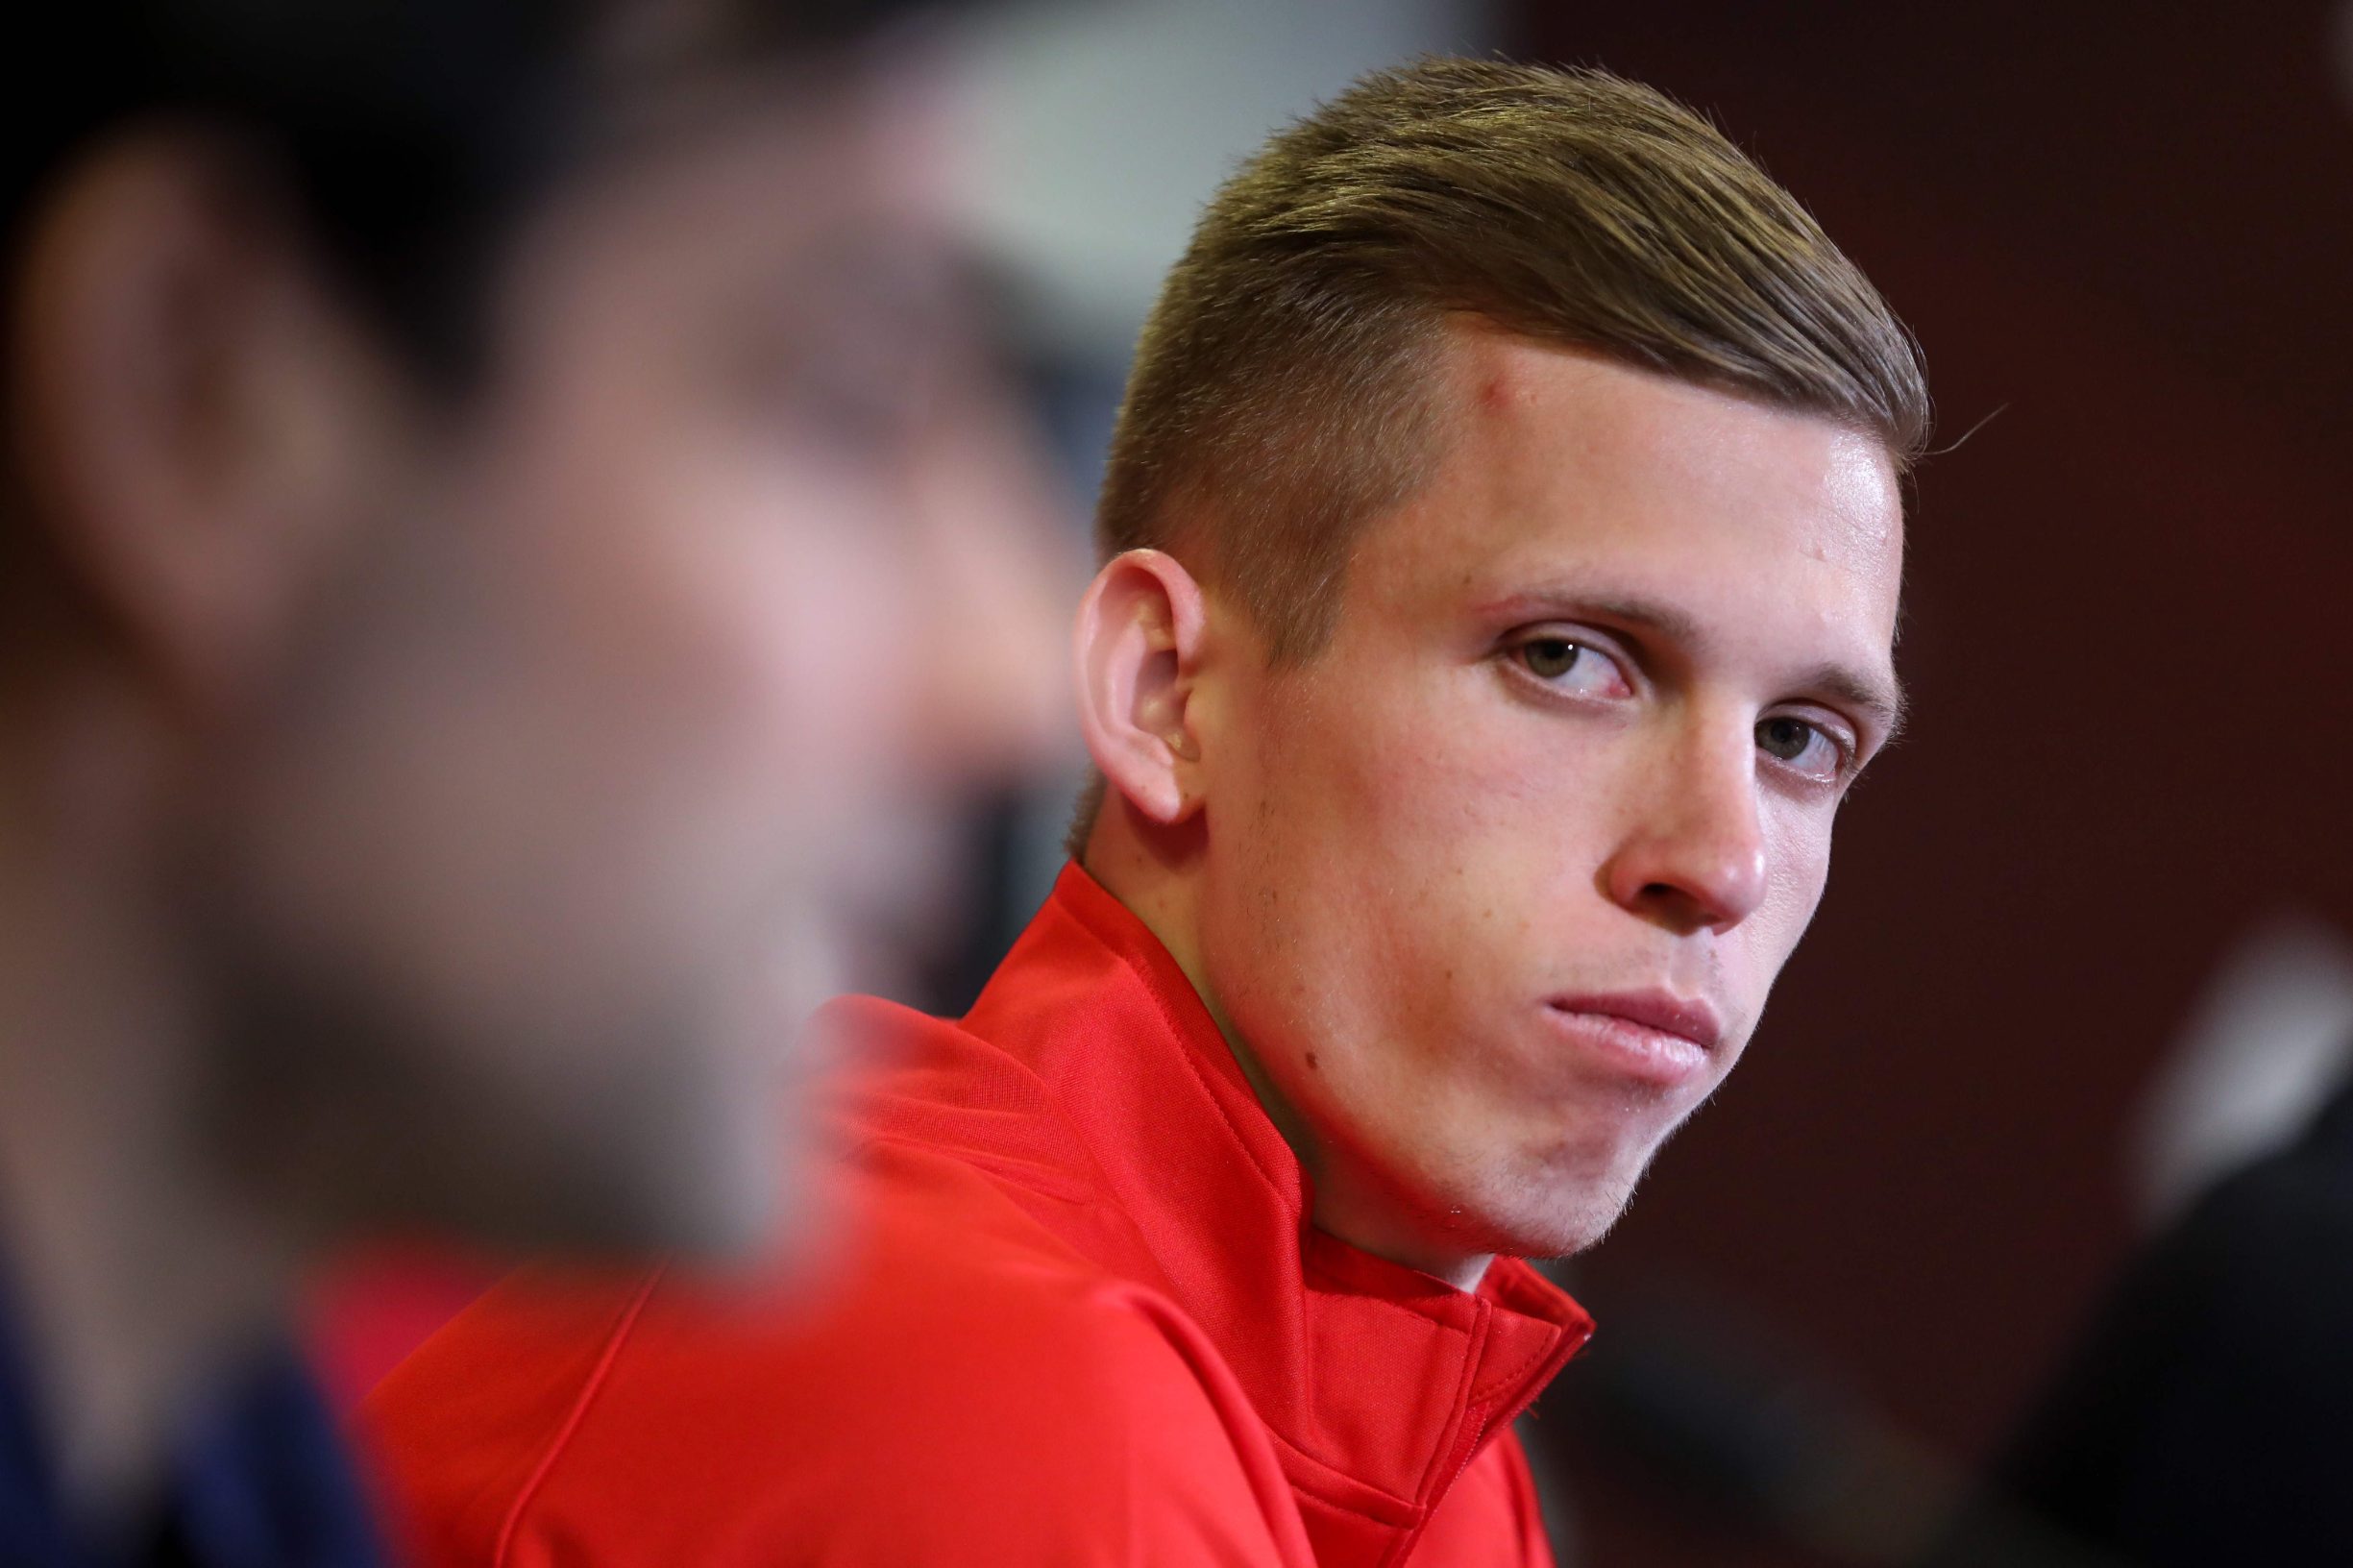 Spanish forward Dani Olmo, new recruit of German first division Bundesliga football club RB Leipzig, attends a press conference on January 27, 2020 in Leipzig, eastern Germany. - Bundesliga leaders RB Leipzig signed Spain Under-21 forward Dani Olmo from Dinamo Zagreb. (Photo by Jan Woitas / dpa / AFP) / Germany OUT